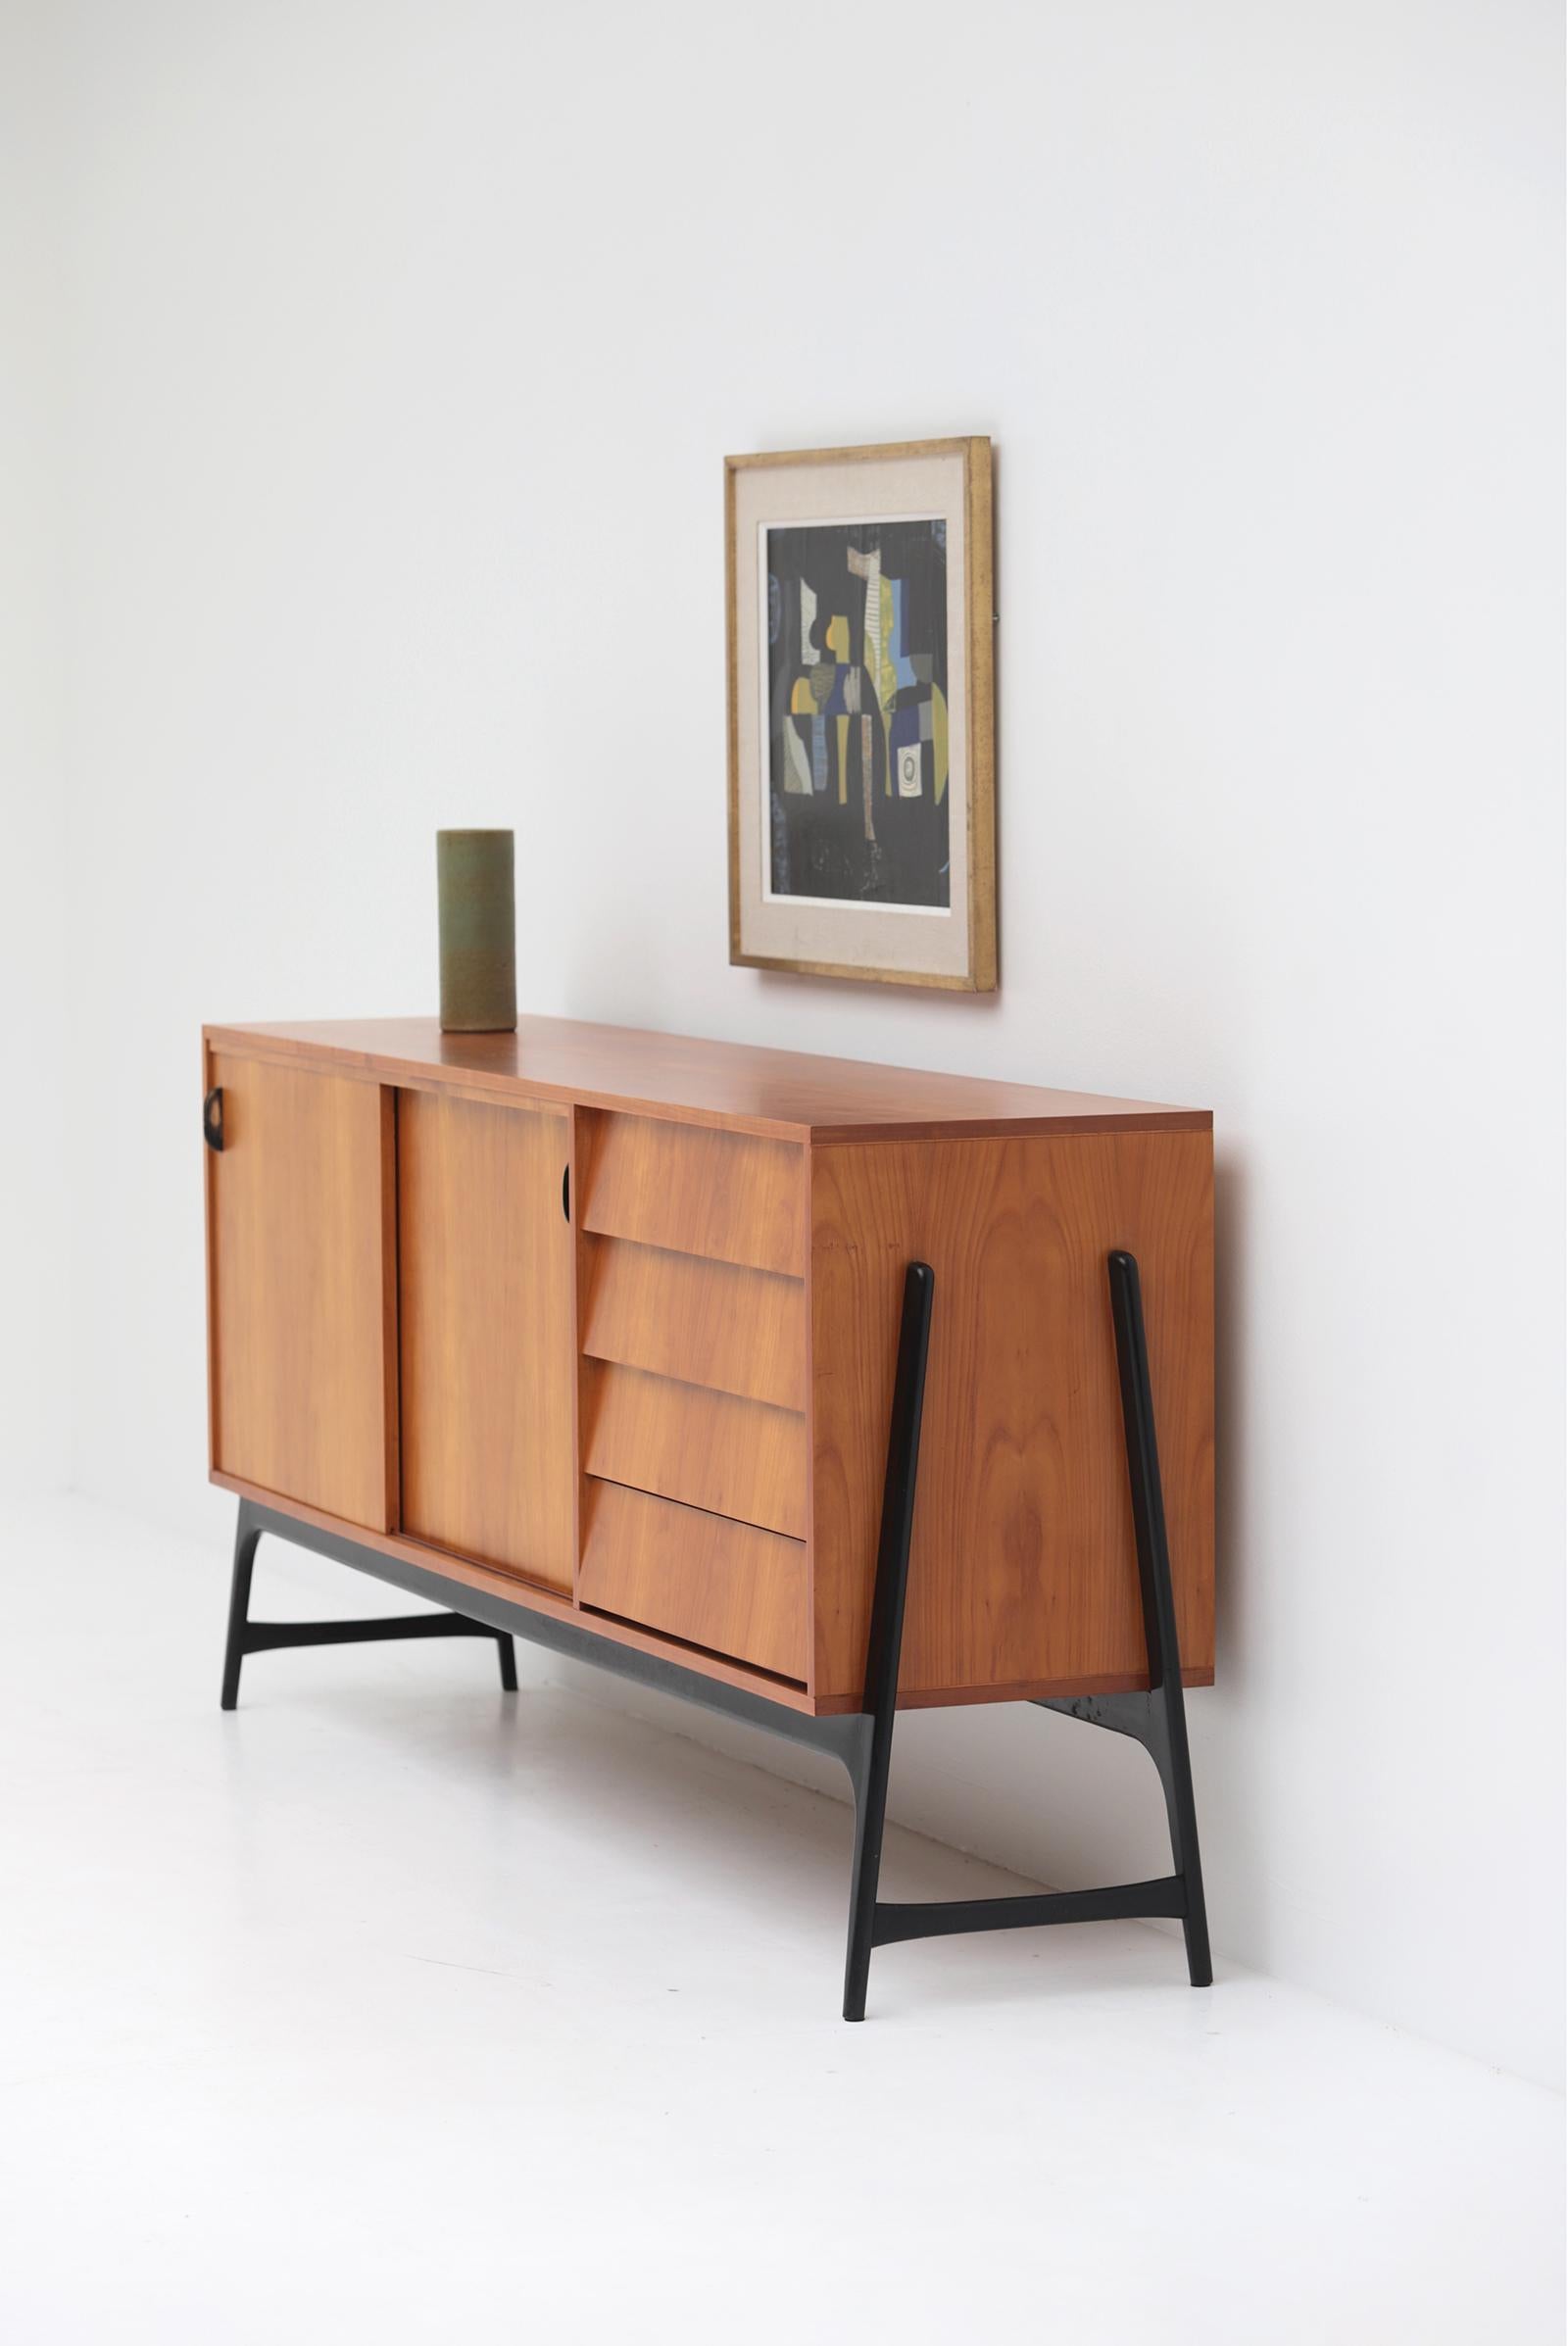 Unique midcentury sideboard by Alfred Hendrickx designed in 1958 for Belform For Sale 2